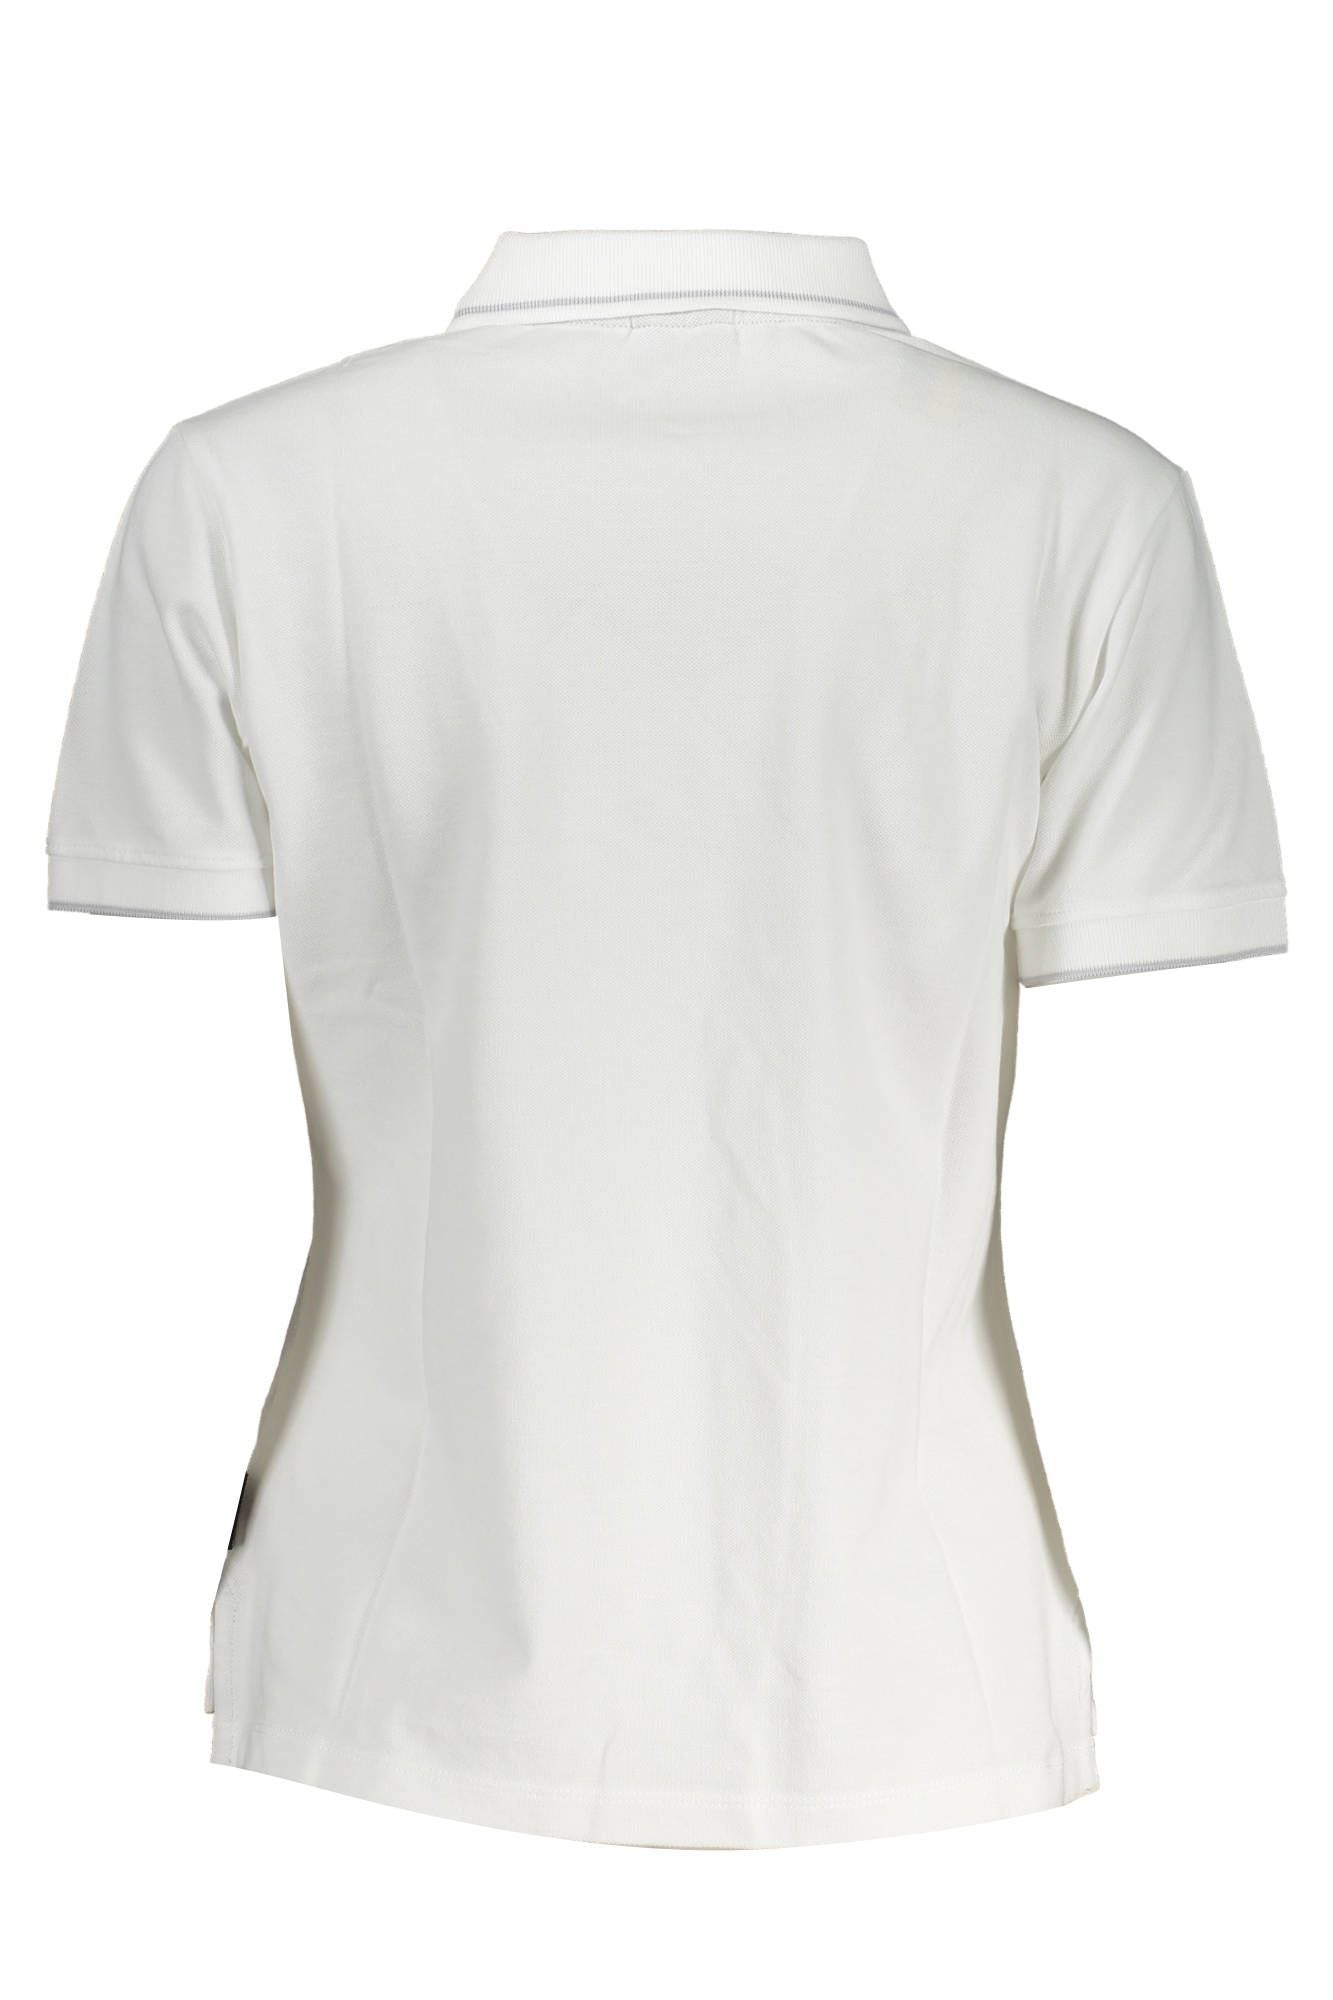 Chic Contrasting Detail White Polo